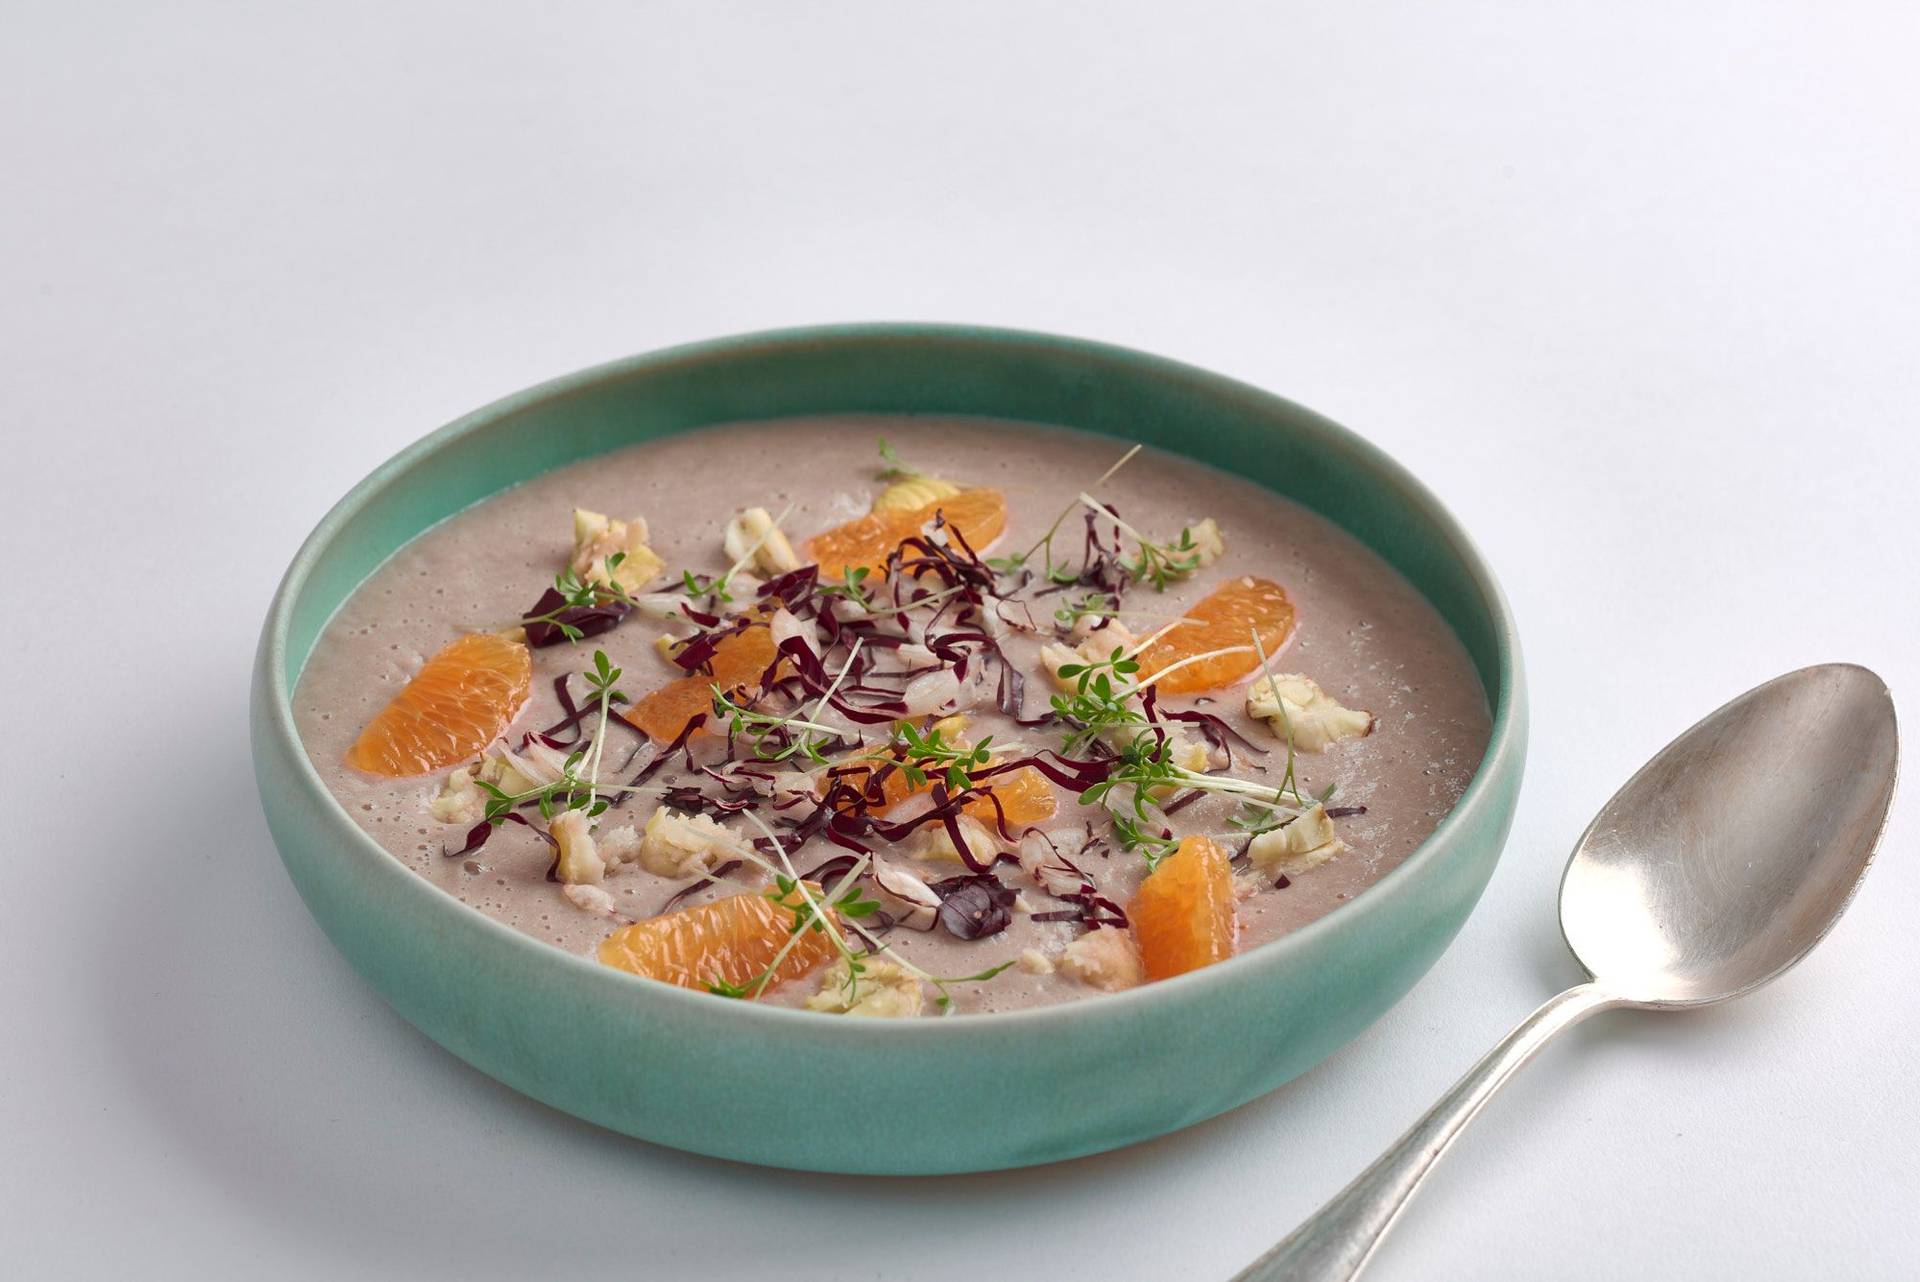 parsnip soup with radicchio tangerine and chestnuts in a turquoise bowl on white background